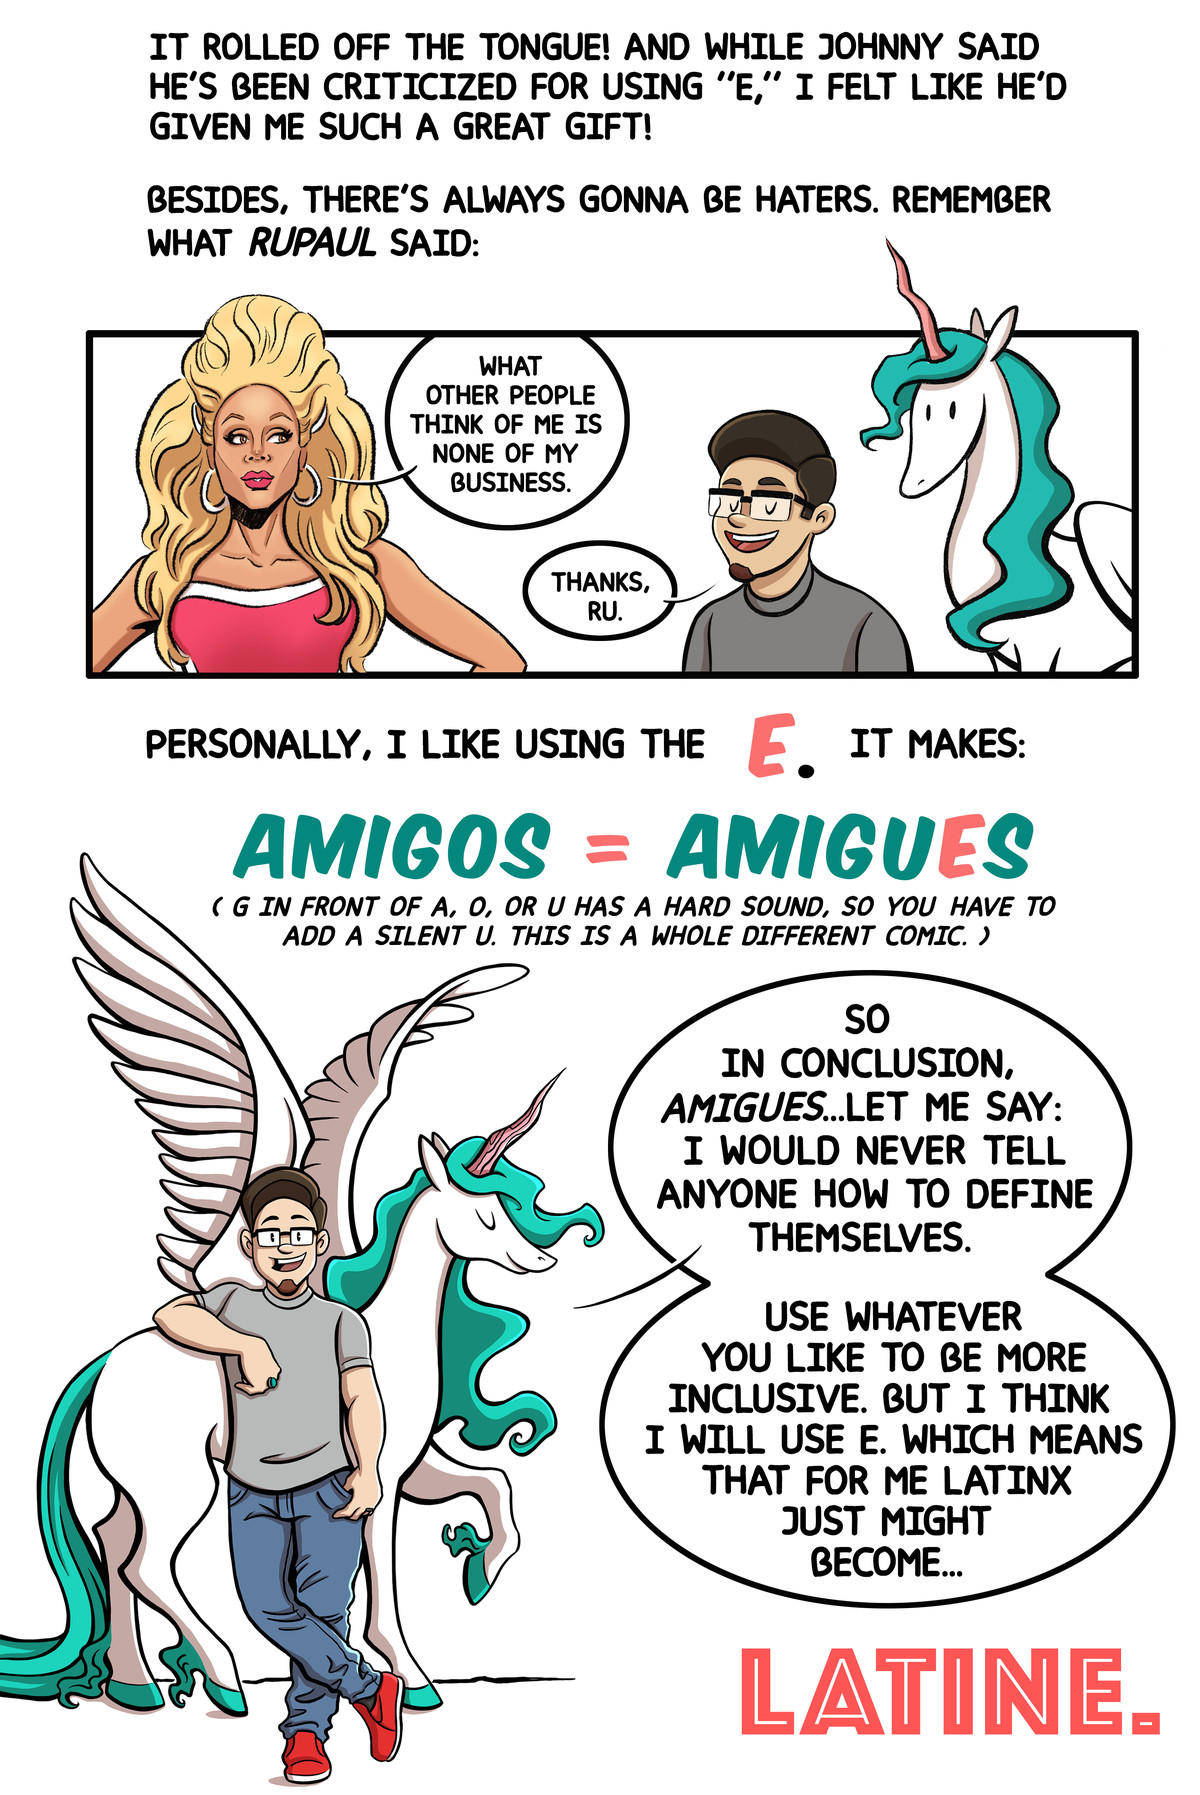 The writer, Terry Blas, discovers he likes using an “e” as a nongendered letter for plural words. So, instead of “Amigos” he will use “Amigues.”